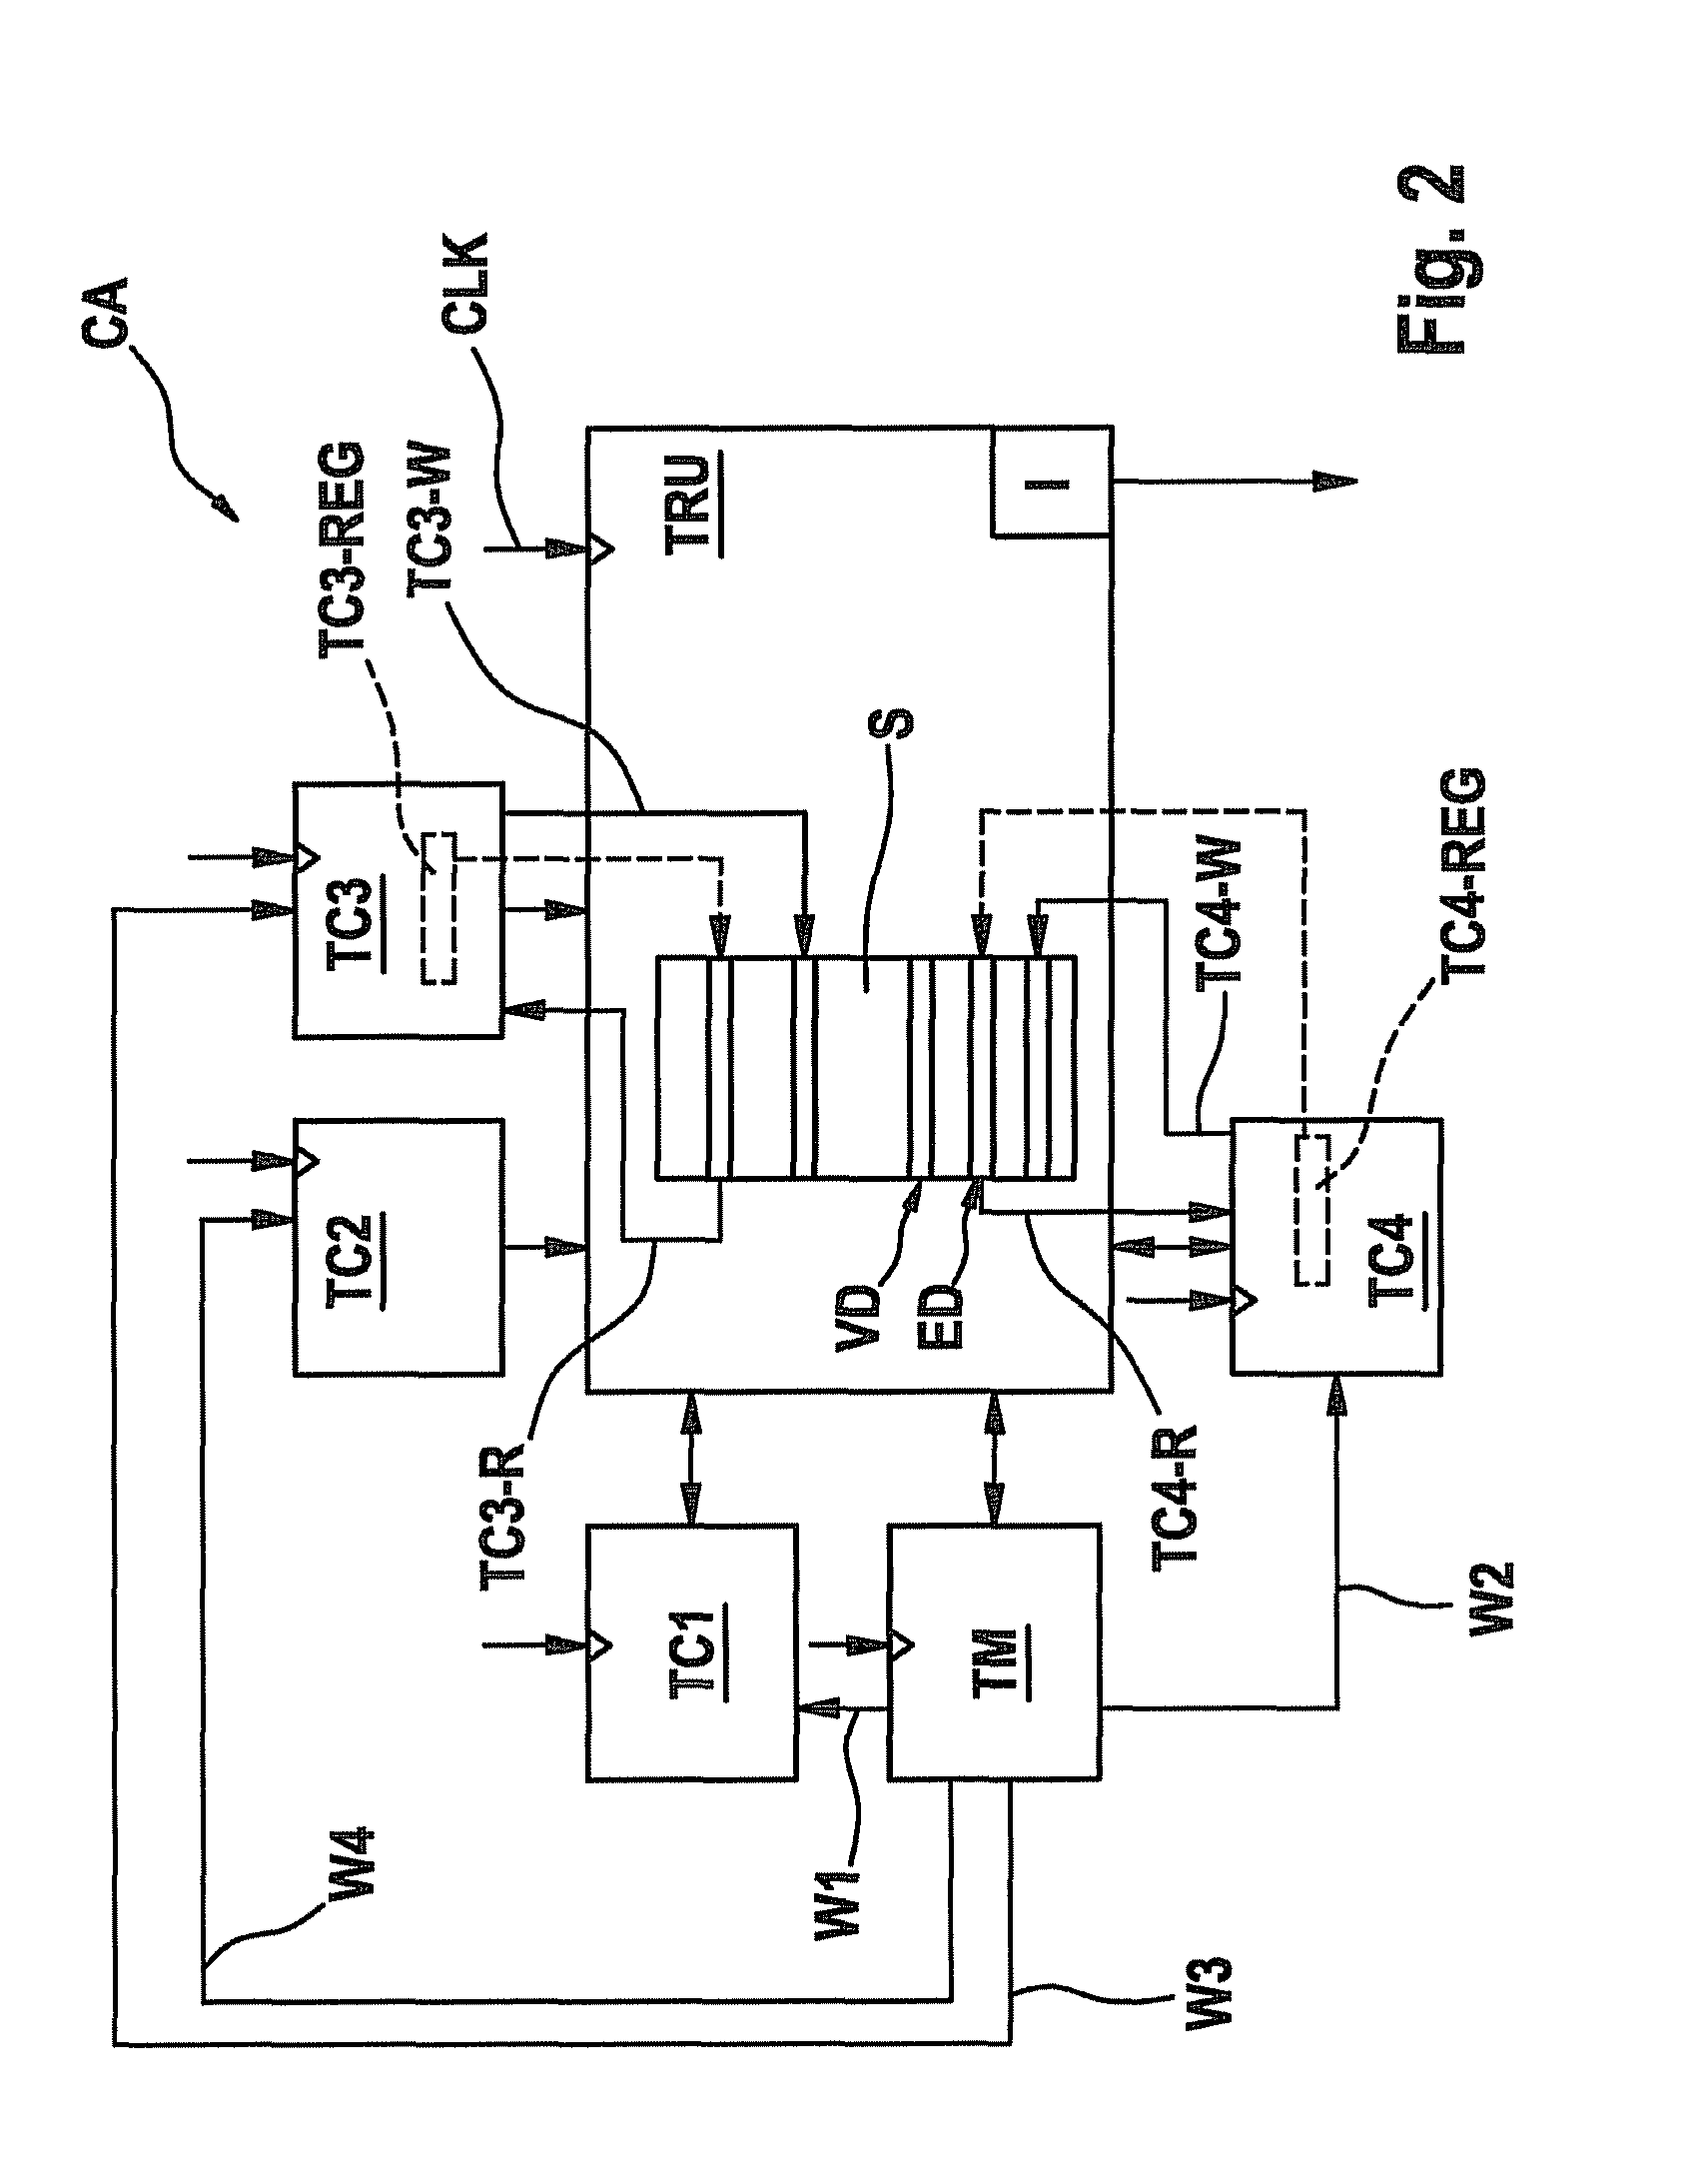 Circuit arrangement for signal pick-up and signal generation and method for operating this circuit arrangement